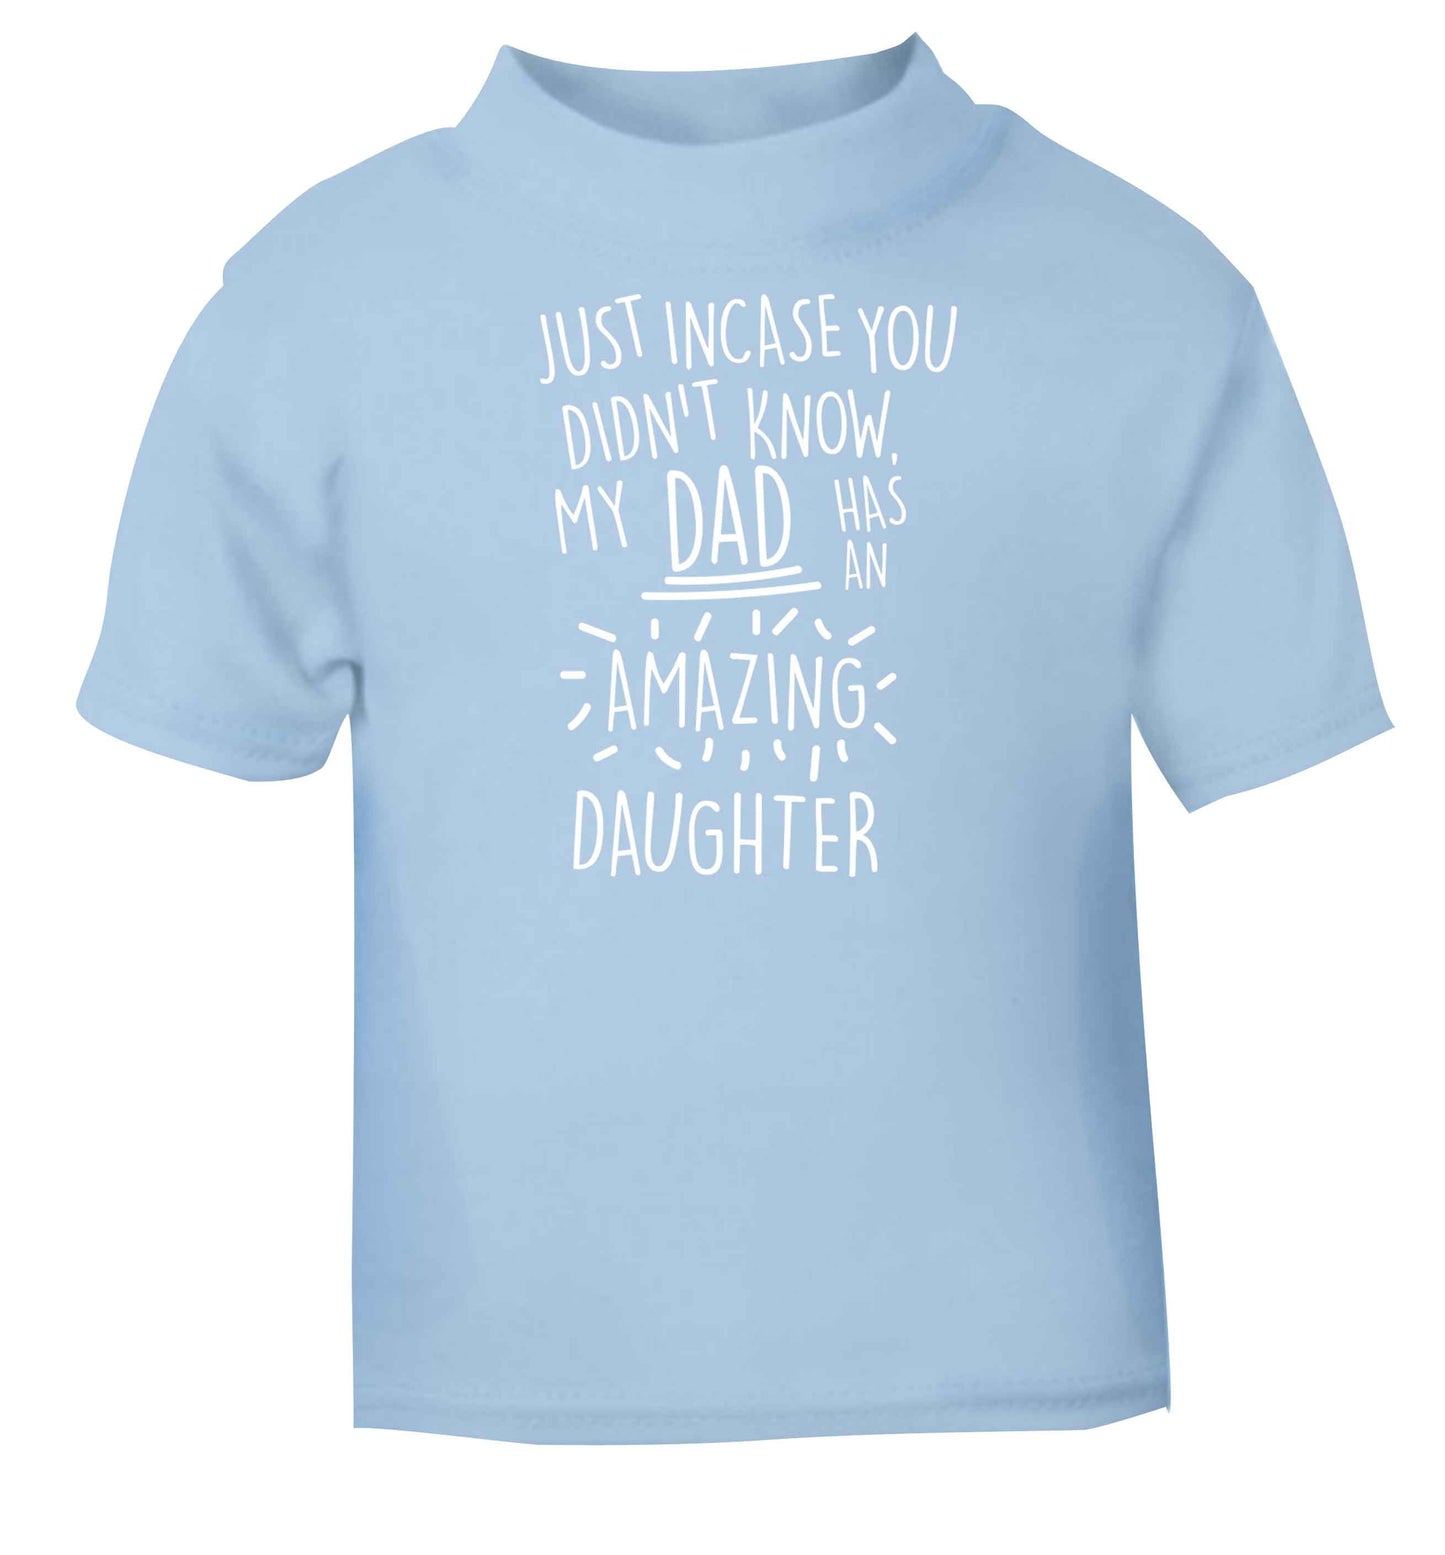 Just incase you didn't know my dad has an amazing daughter light blue baby toddler Tshirt 2 Years